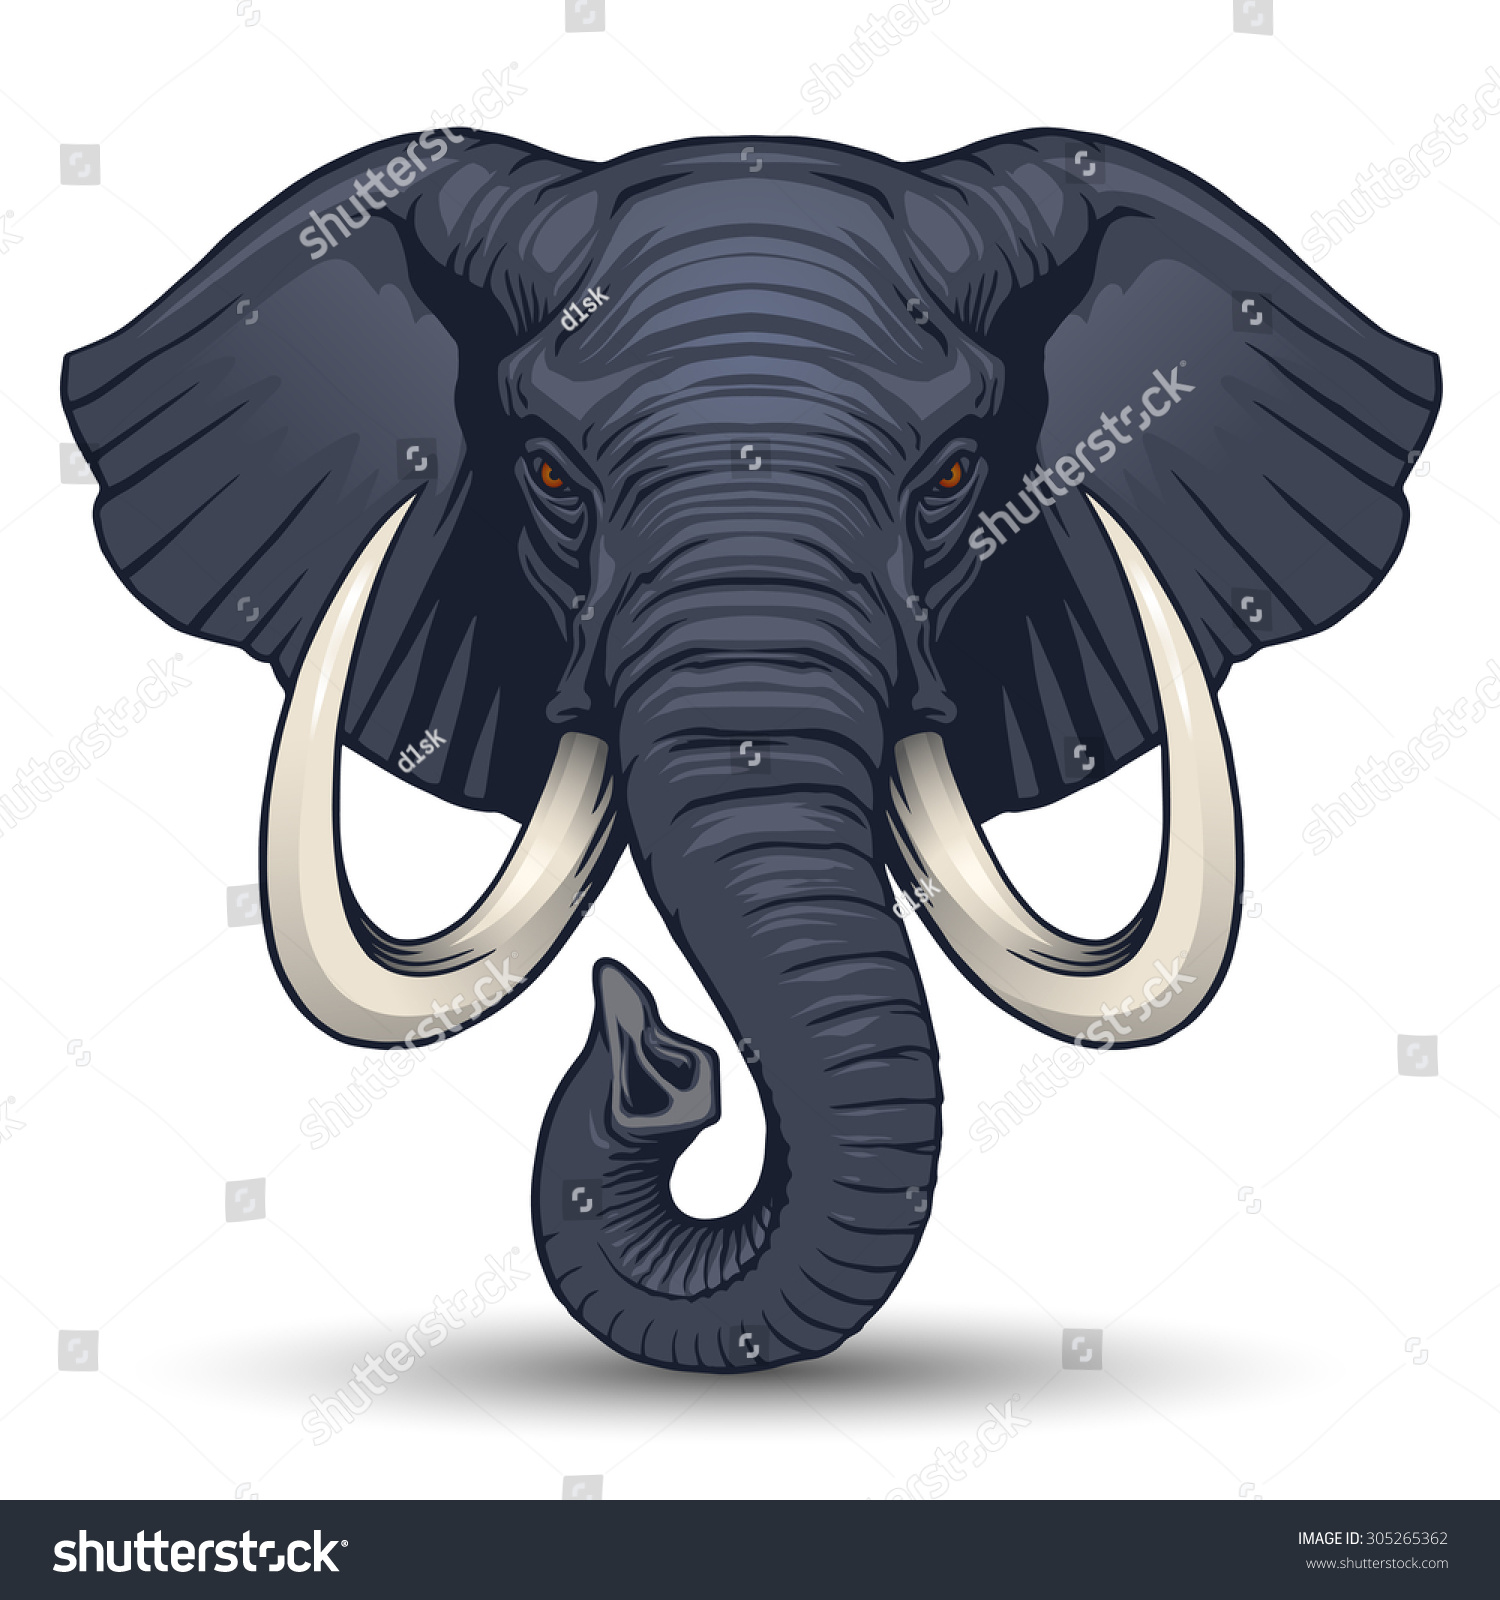 elephant clipart front view - photo #18